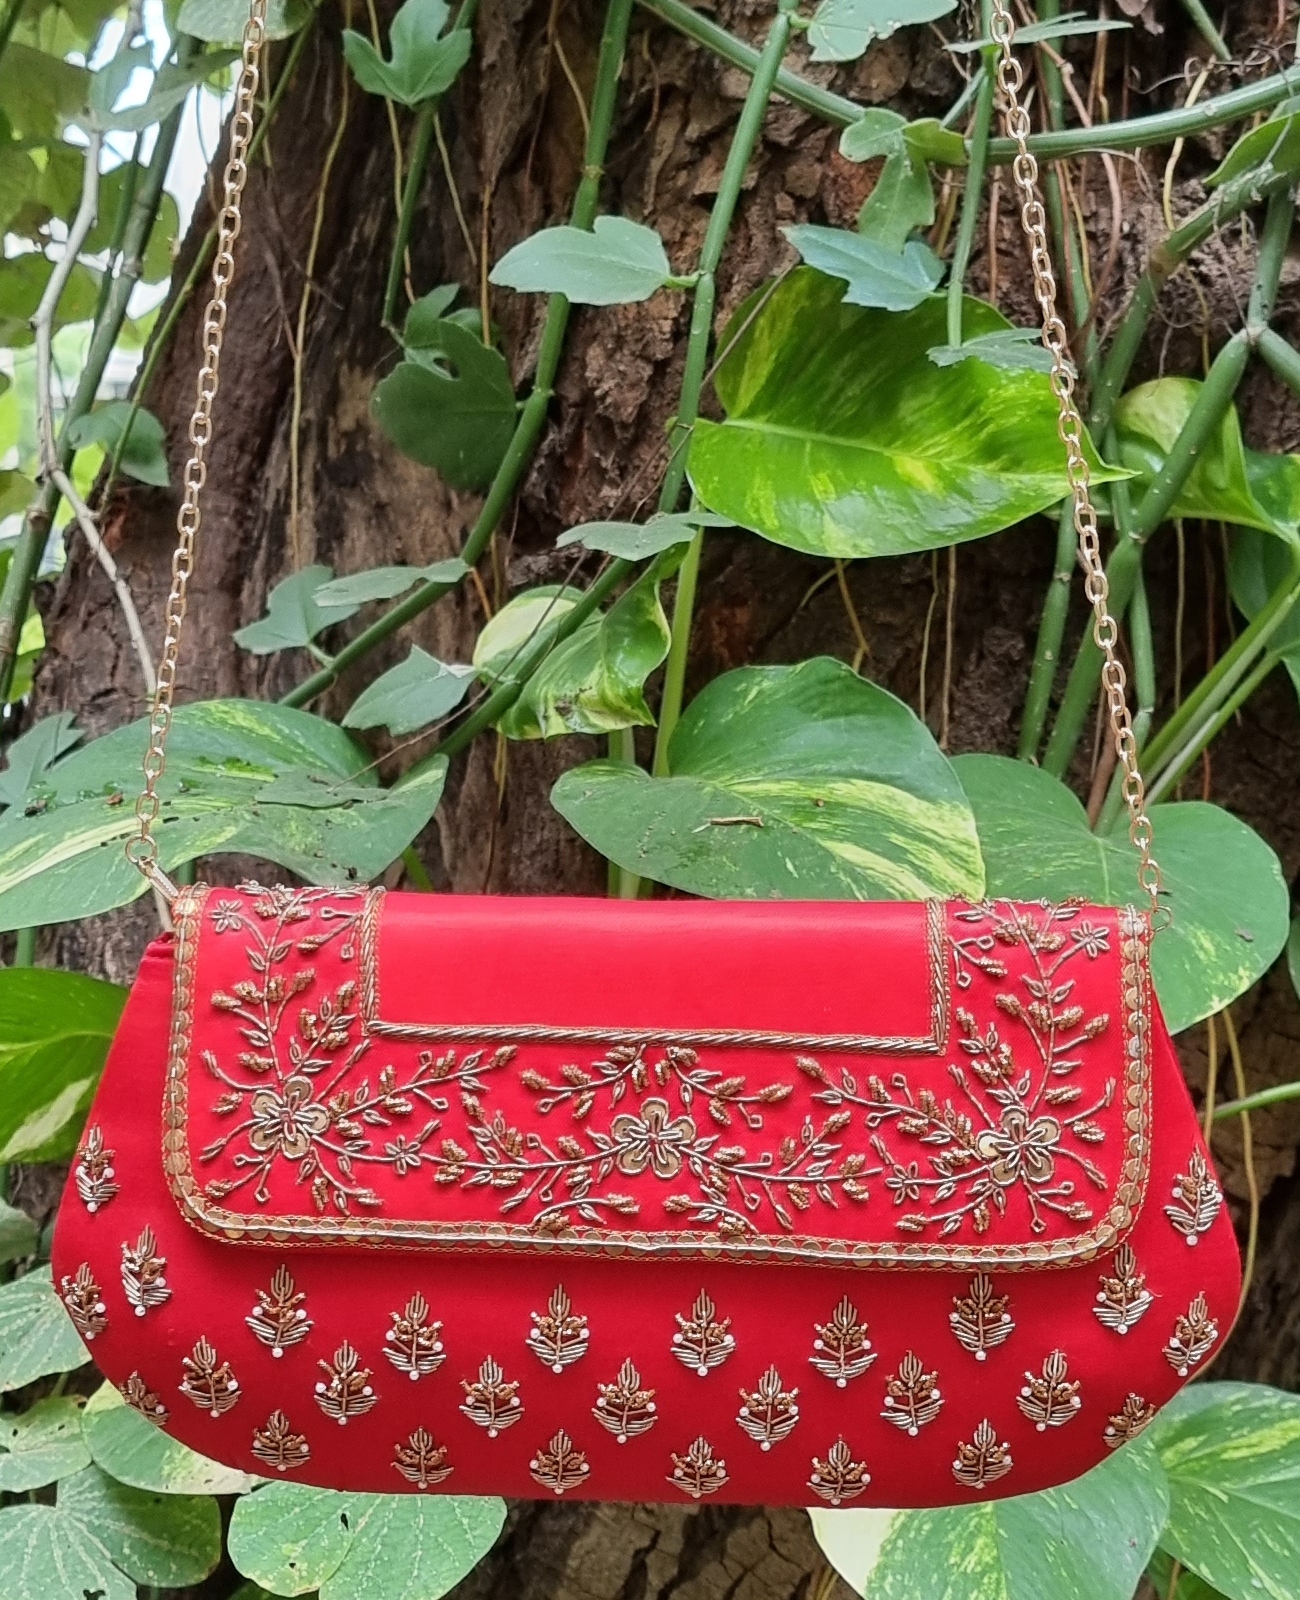 Gucci Bag Green And Red - 50 For Sale on 1stDibs | gucci bag with red and  green strap, gucci purse with red and green strap, gucci bag red and green  strap